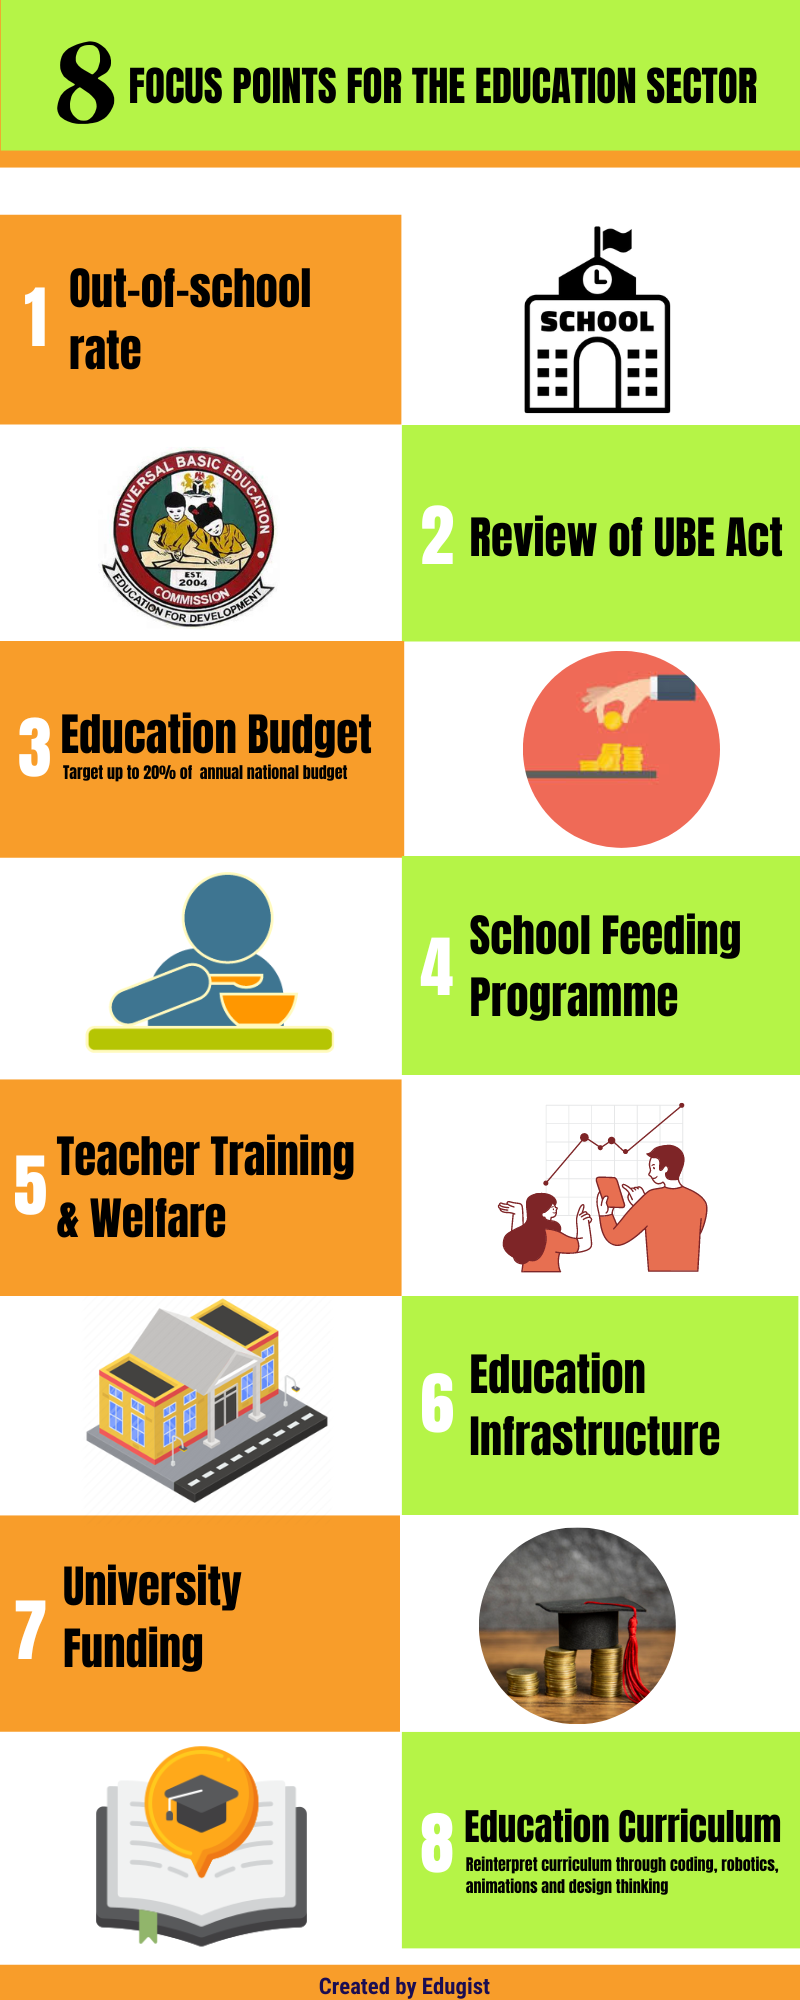 Buhari's promises for education sector